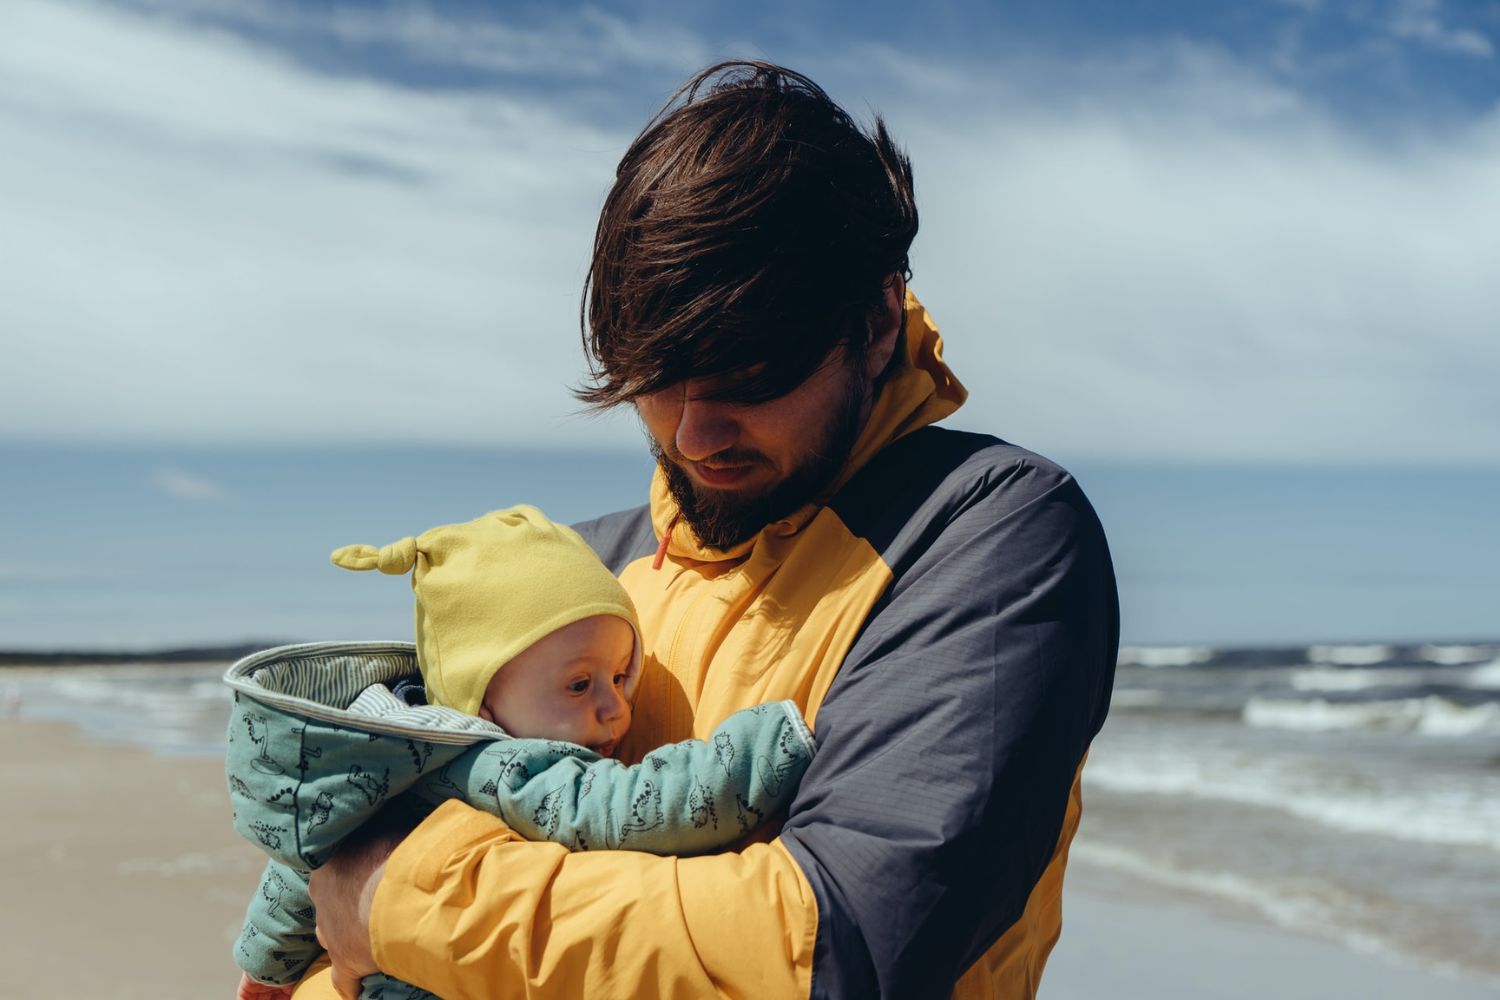 dad-and-baby Photo by Peter Dlhy on Unsplash